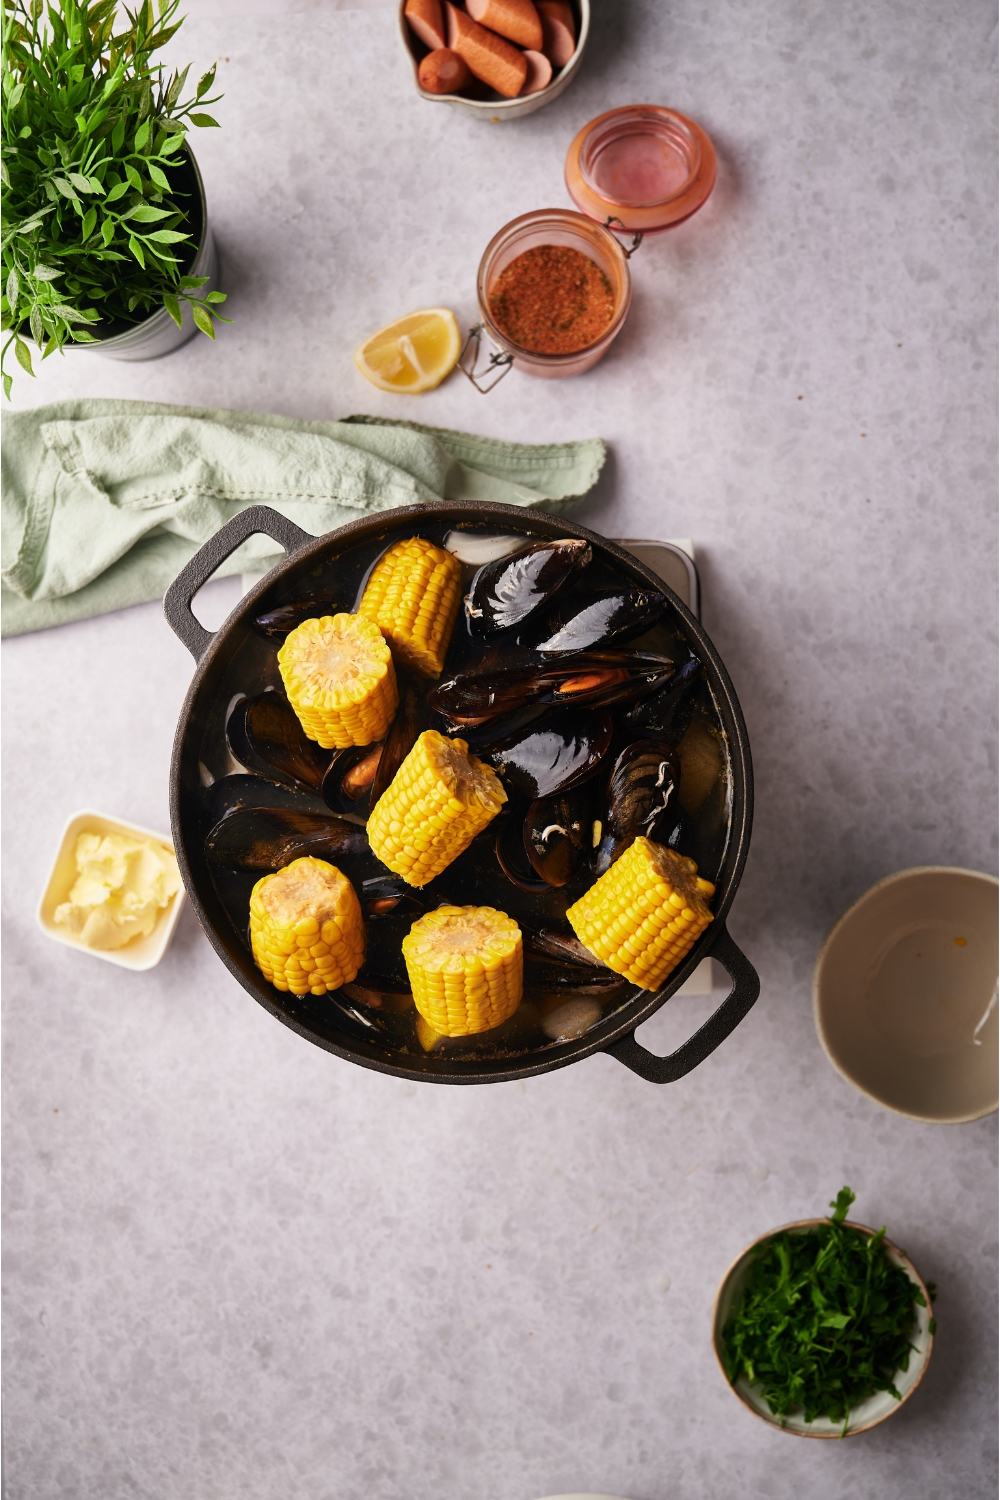 A black Dutch oven filled with clams and corn-on-the-cob pieces in a broth. Surrounding the Dutch oven is an assortment of ingredients including butter, fresh herbs, and spices.